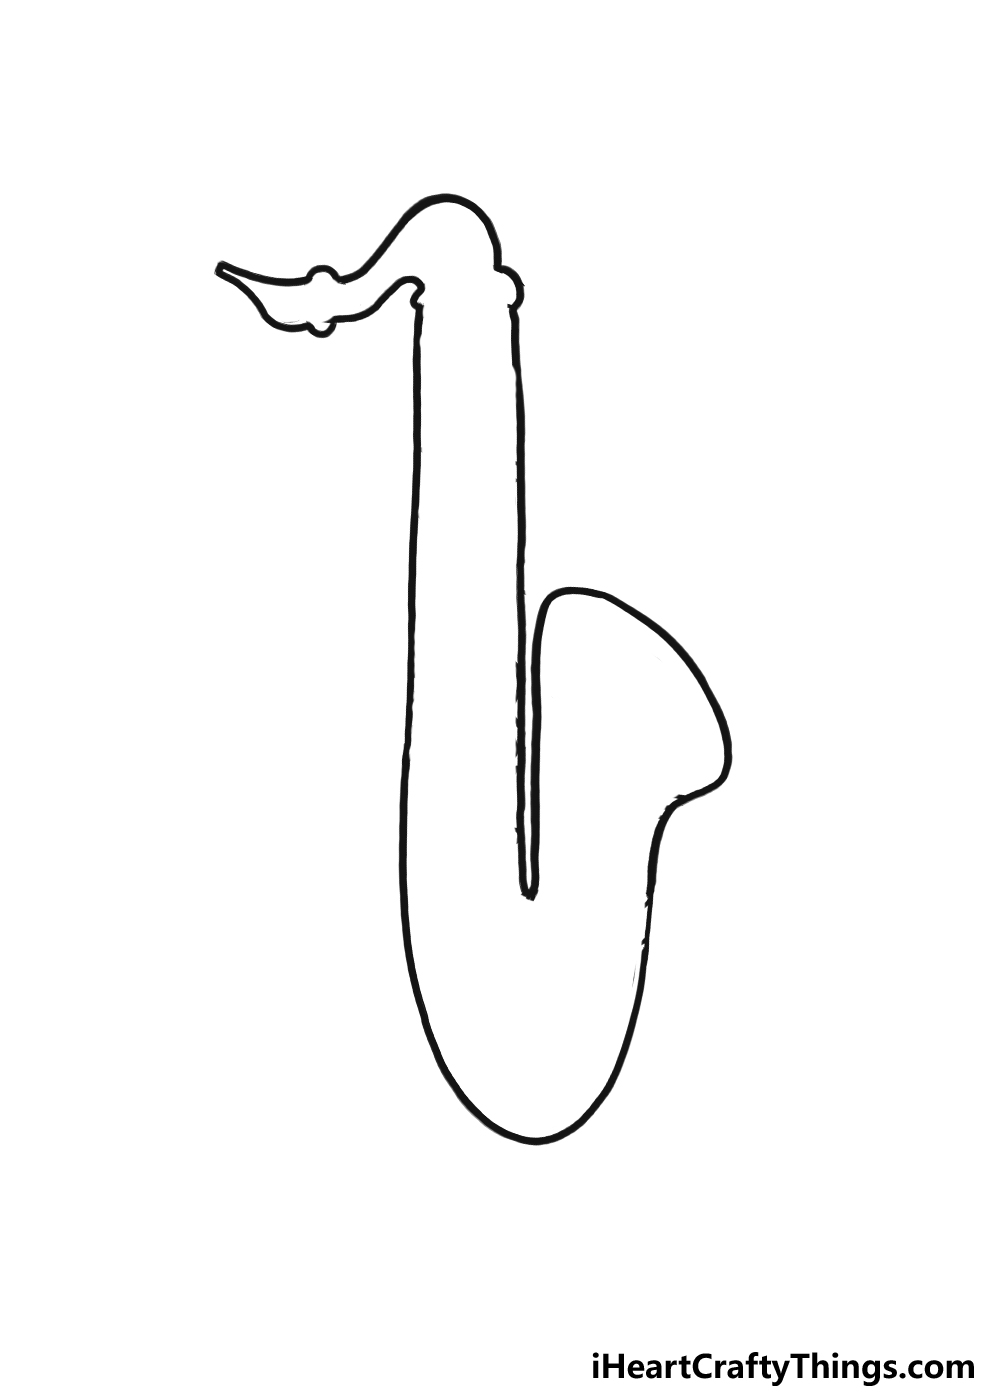 How to Draw A Saxophone step 2